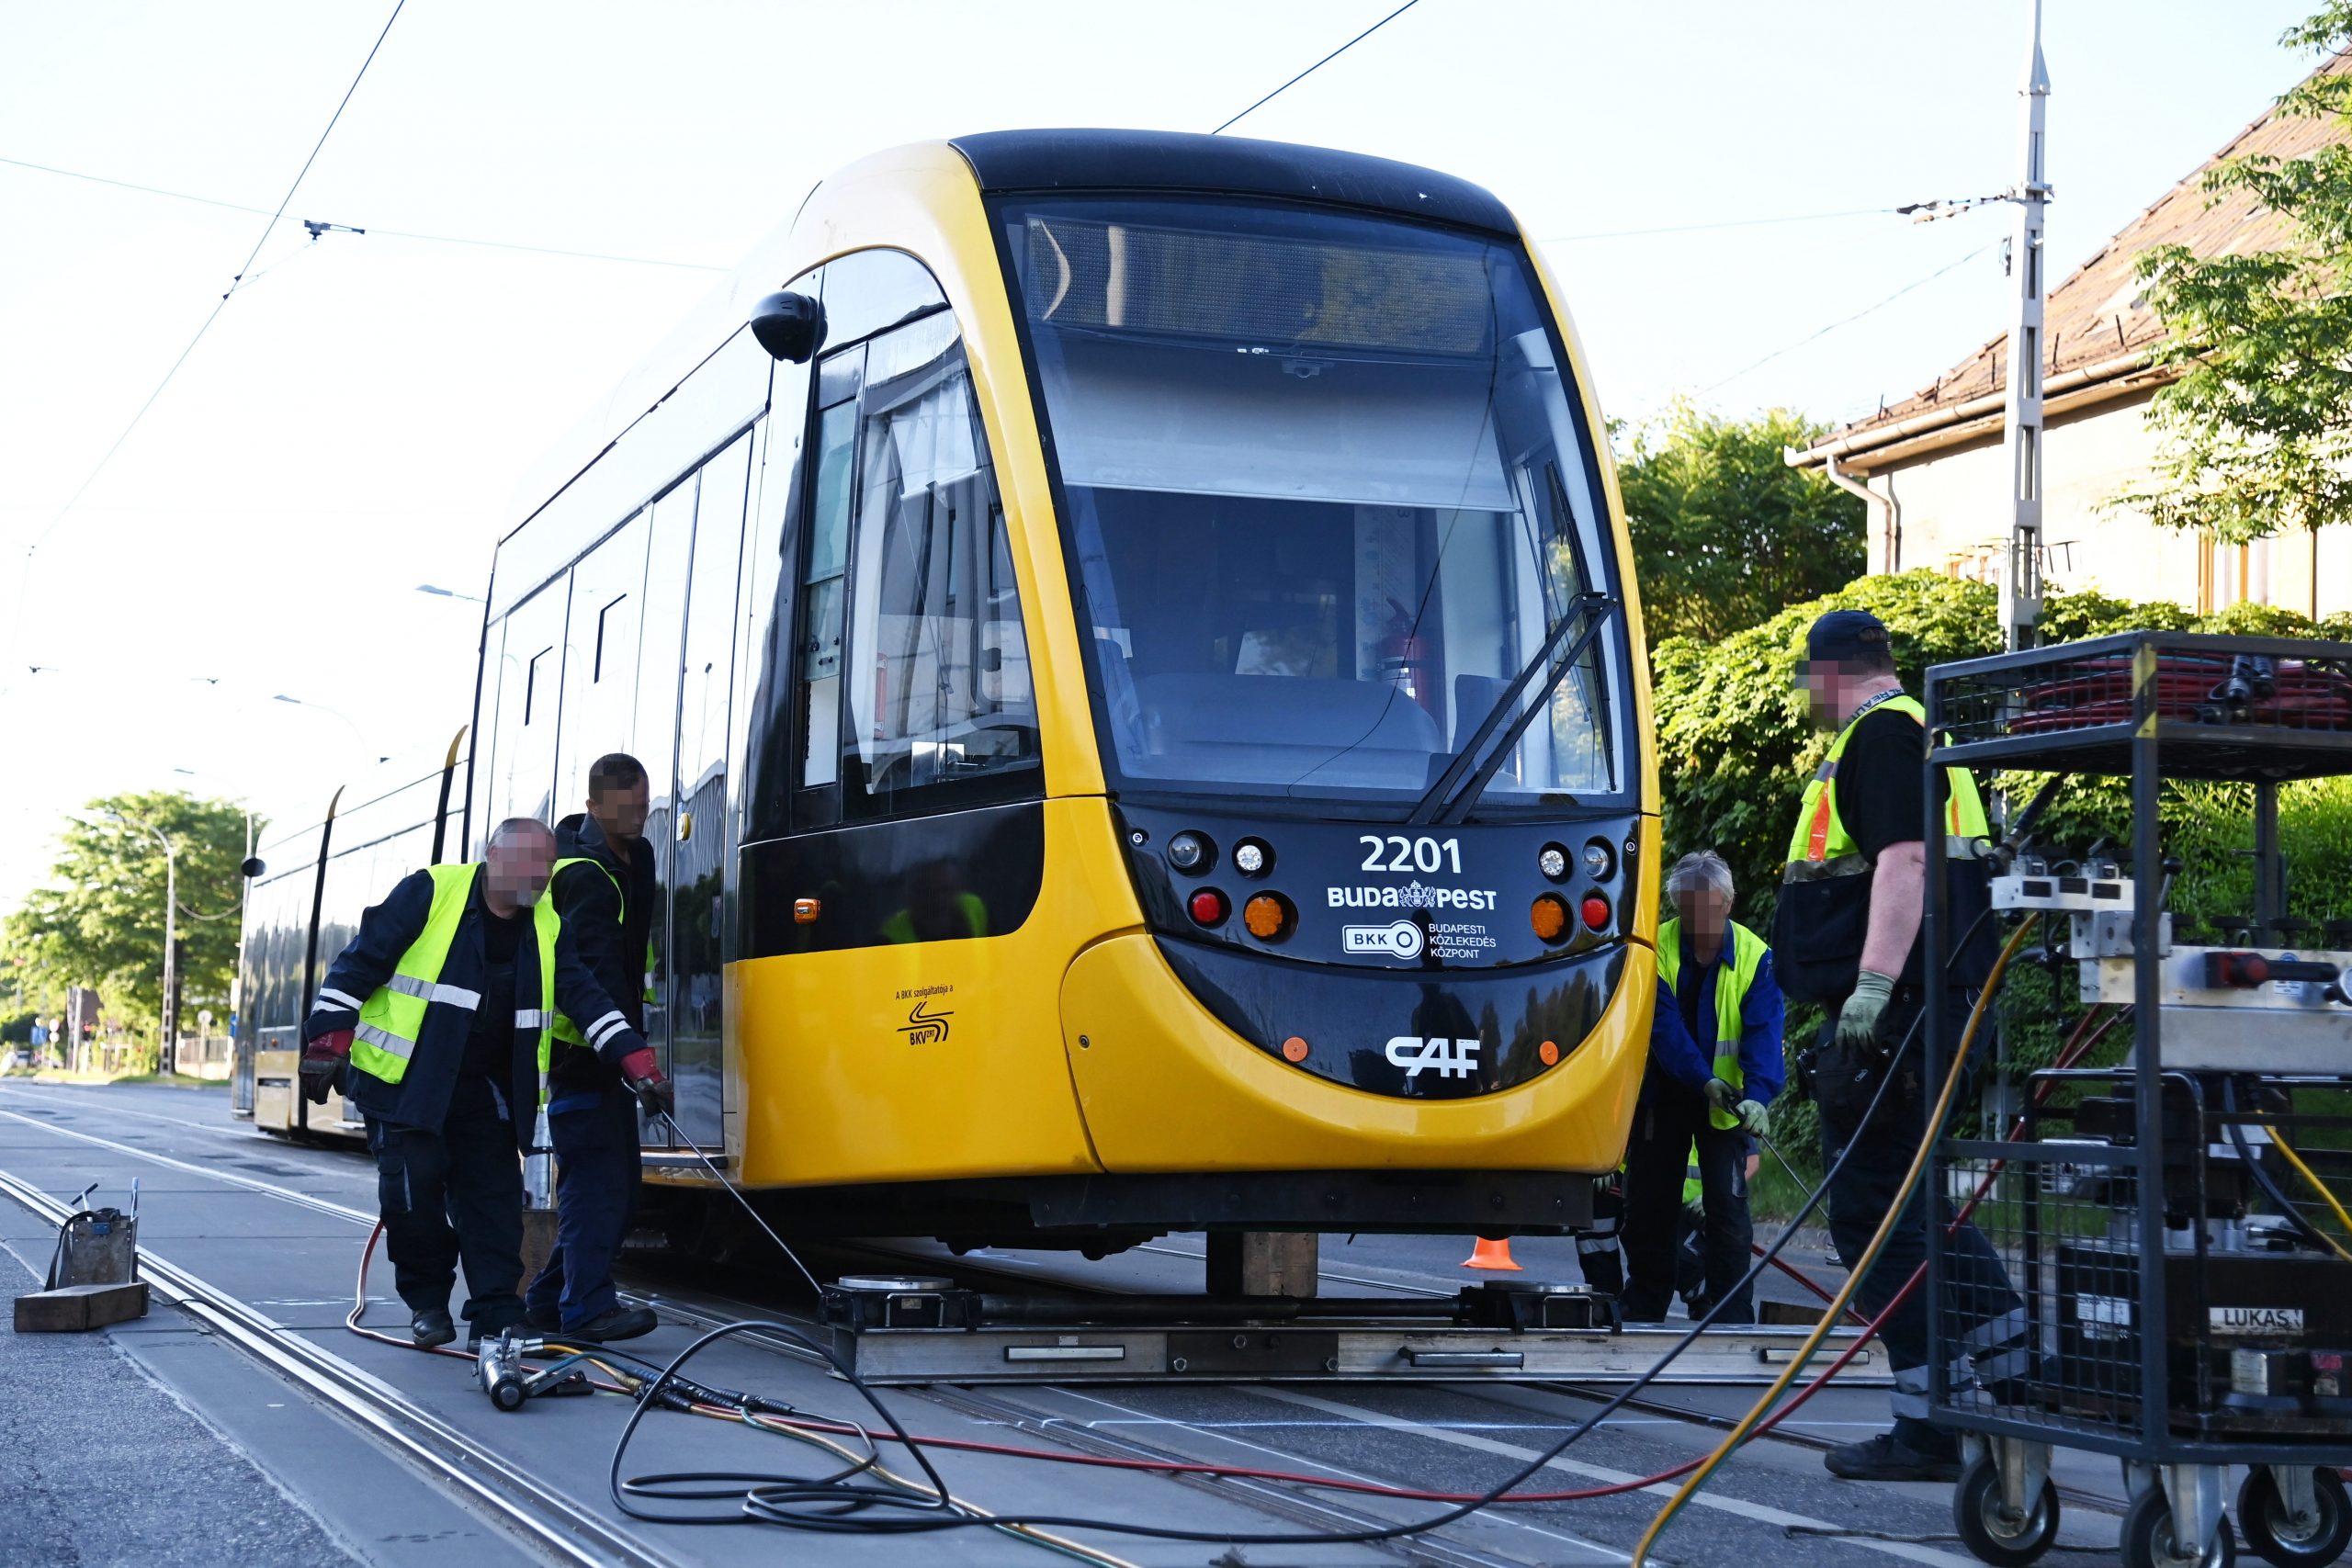 Fidesz Budapest Chapter Questions City Leadership Over Used Frankfurt Tram Purchase